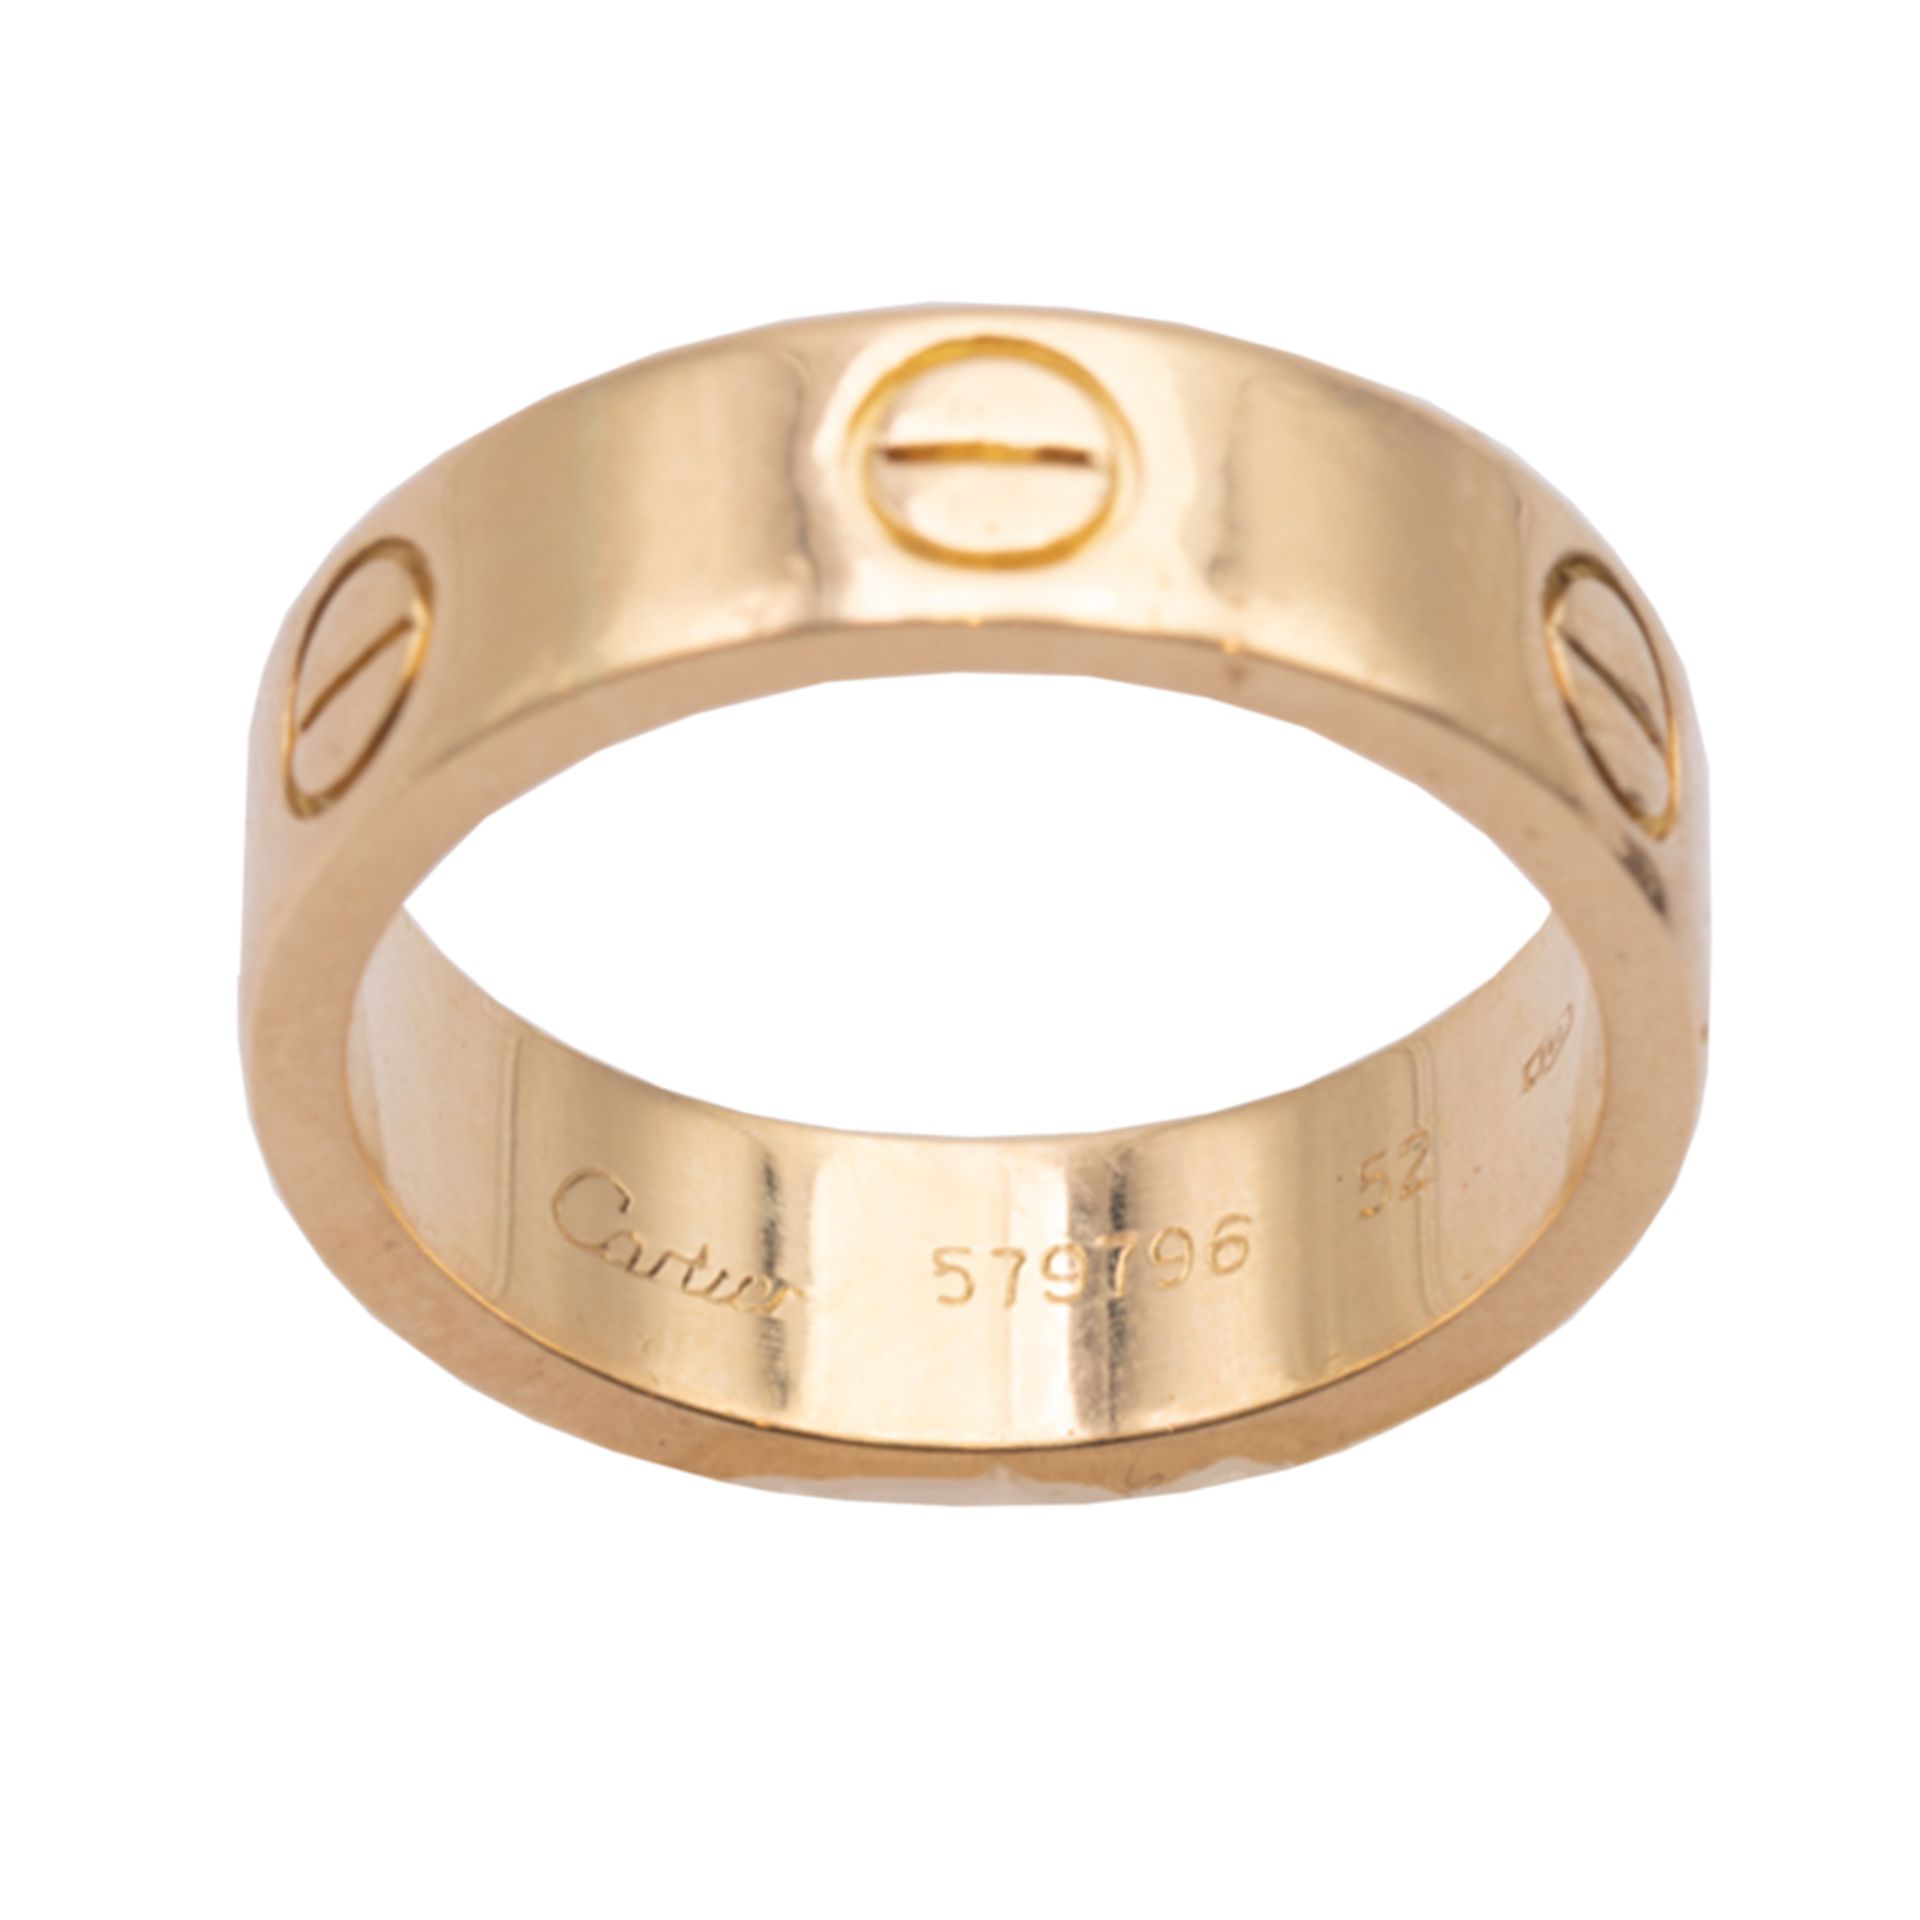 Cartier Love collection ring - Image 2 of 2